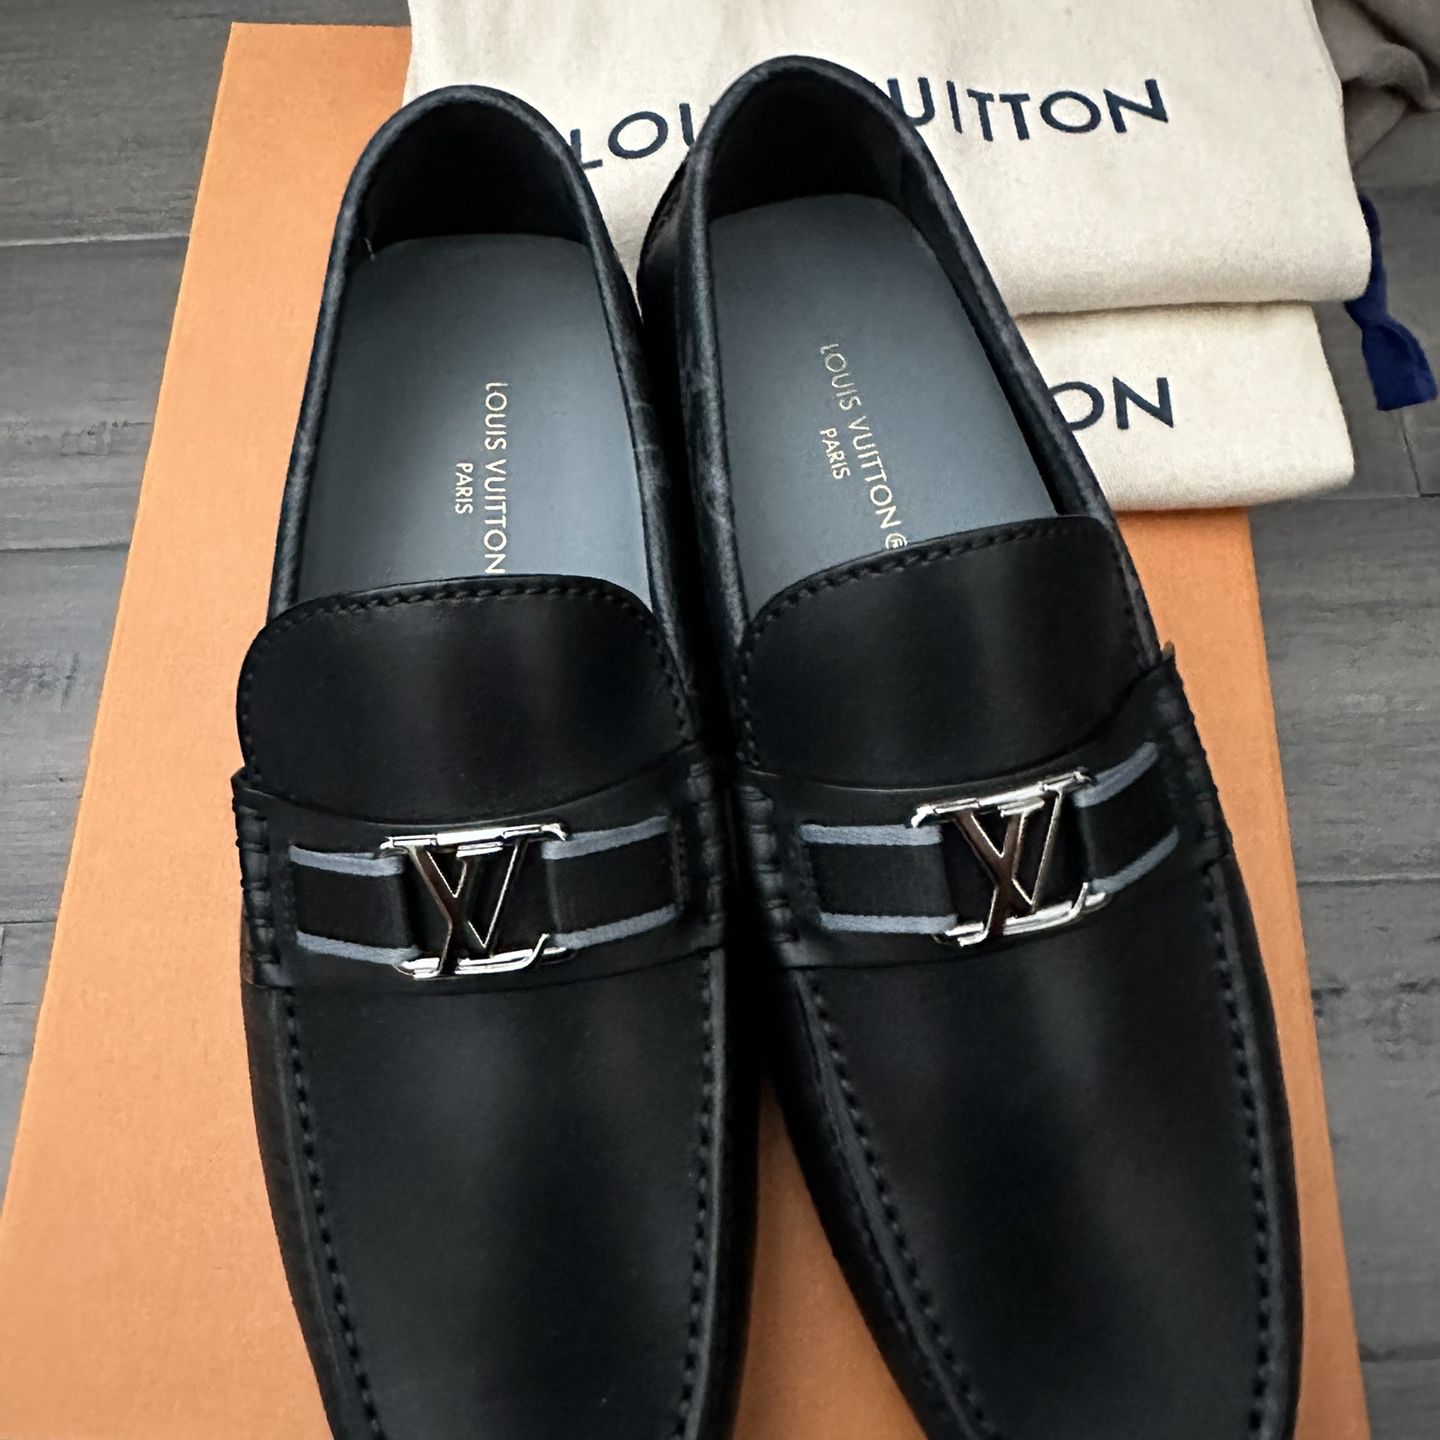 New Men's Louis Vuitton Black Slip On Loafers Shoes for Sale in